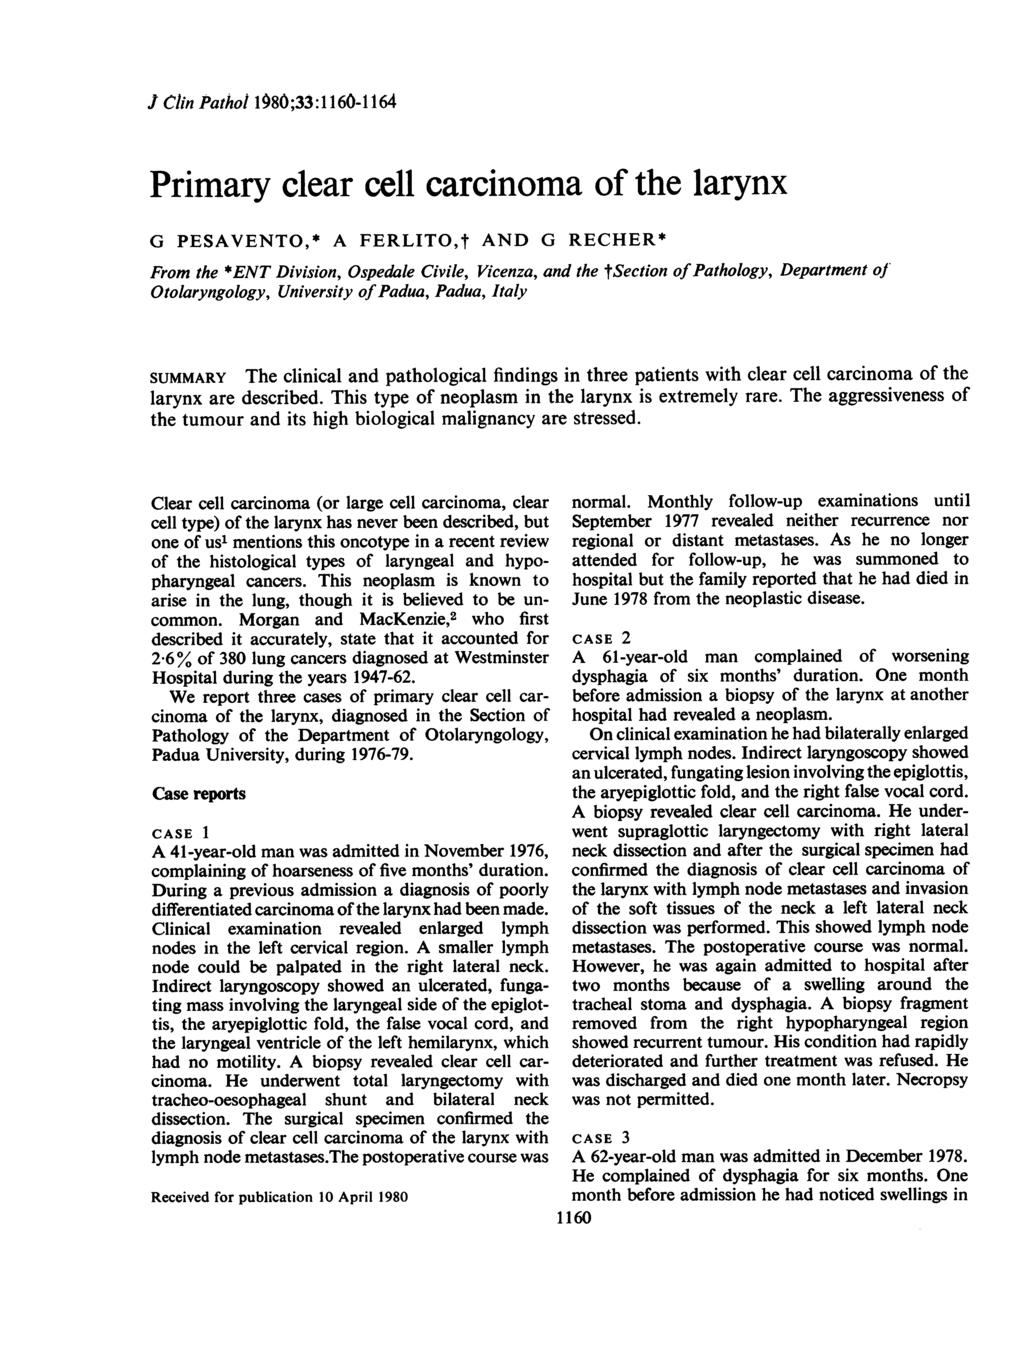 J Clin Pathol 1080;33:1160-1164 Primary clear cell carcinoma of the larynx G PESAVENTO,* A FERLITOt AND G RECHER* From the *ENT Division, Ospedale Civile, Vicenza, and the tsection ofpathology,